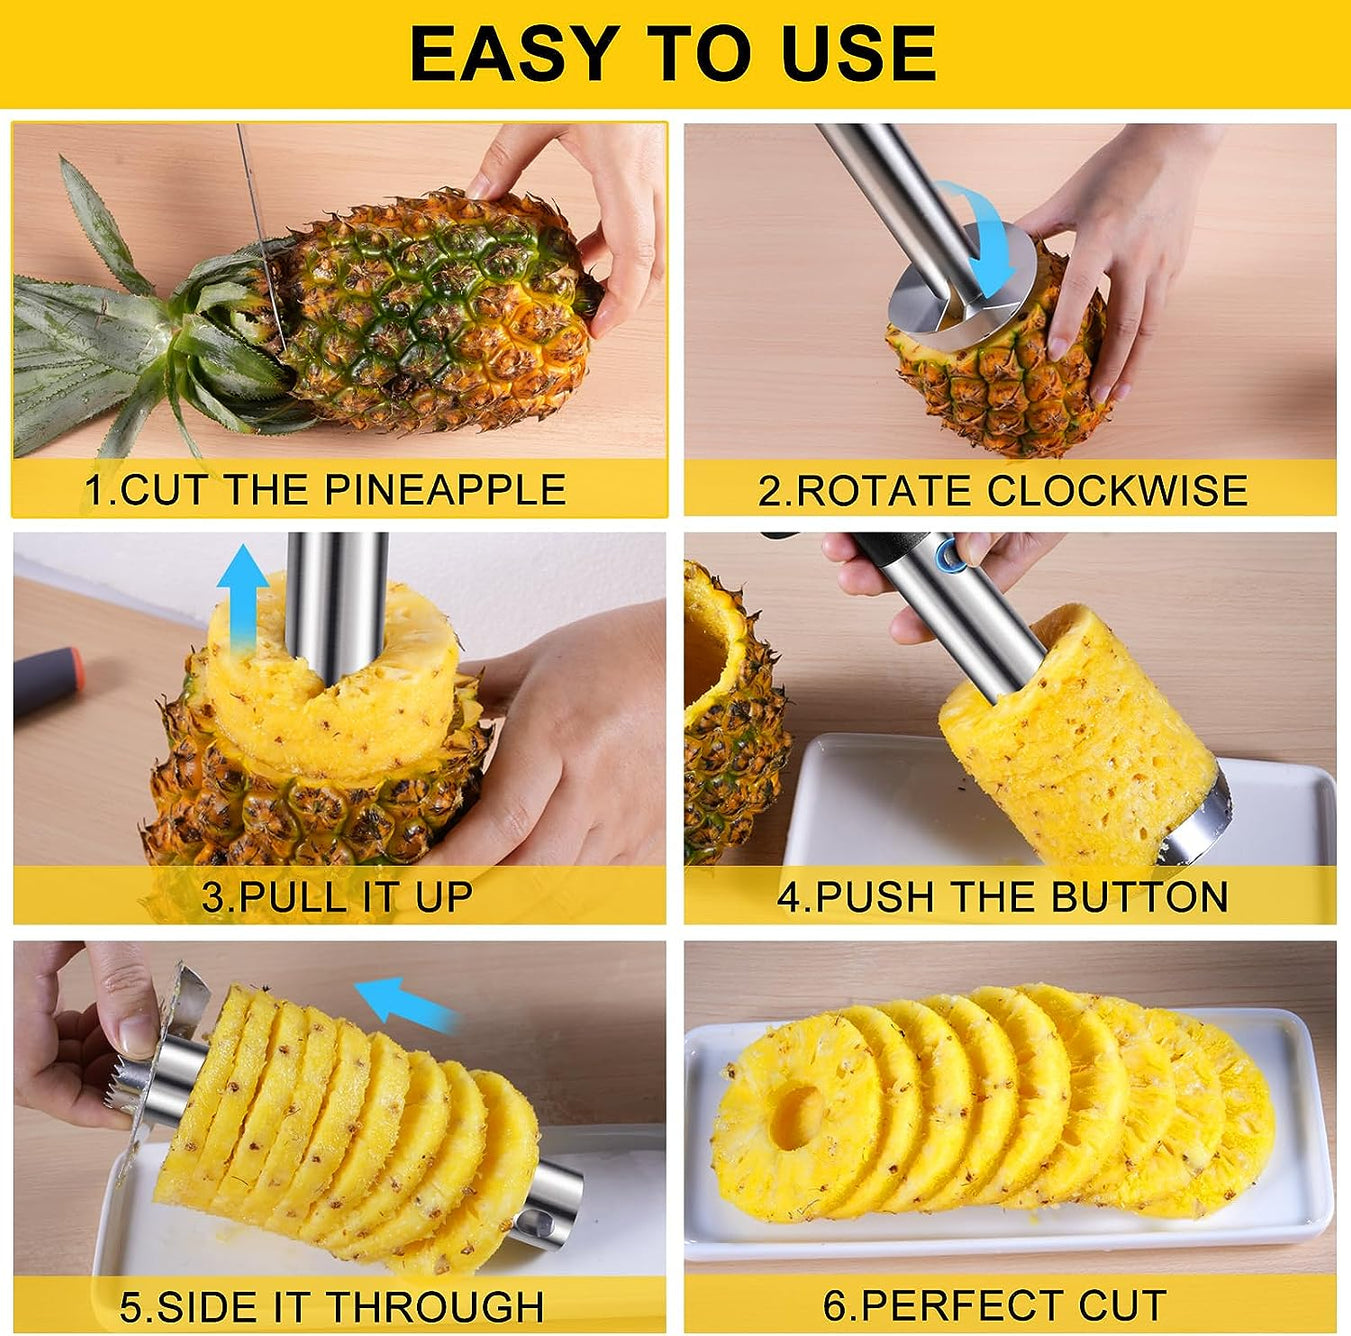 Pineapple Cutter and Corer, Durable Pineapple Corer Remover with Upgraded Cutter & Sharp Teeth, Stainless Steel Kitchen Pineapple Slicer Tool, Black Handle